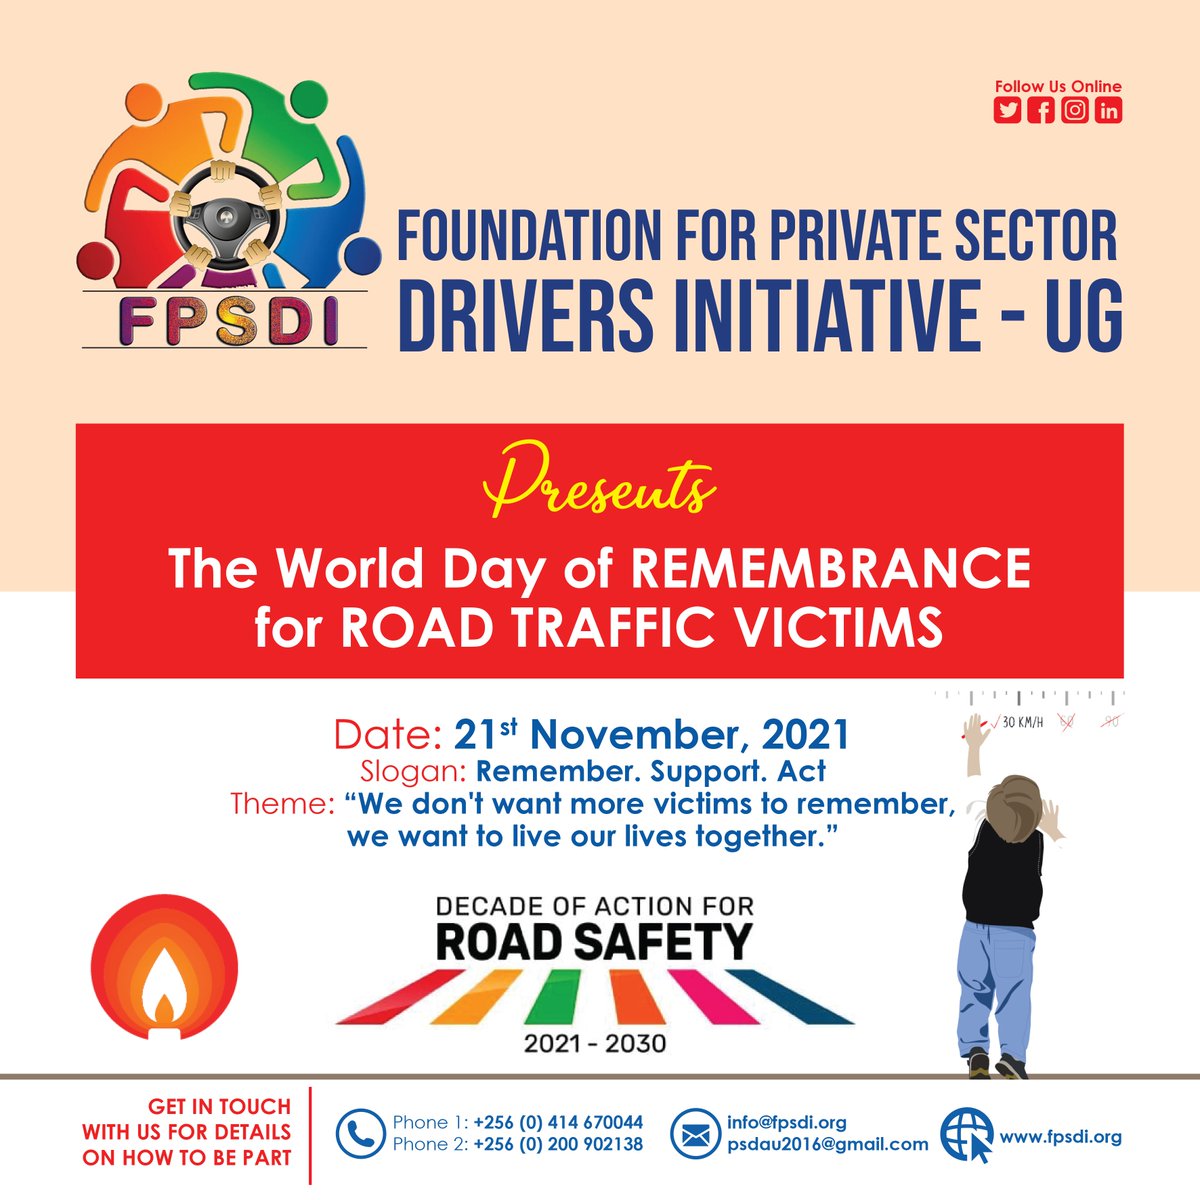 Foundation for Private Sector Drivers Initiative - Uganda (FPSDI).
Presents the 2021 Edition of the World Day of Remembrance
for Road Traffic Victims.

#WDoR2021 #fpsdi #drivers #initiate #roadsafety #reachsafely #fiikasalam #uganda #africa 

Website: fpsdi.org